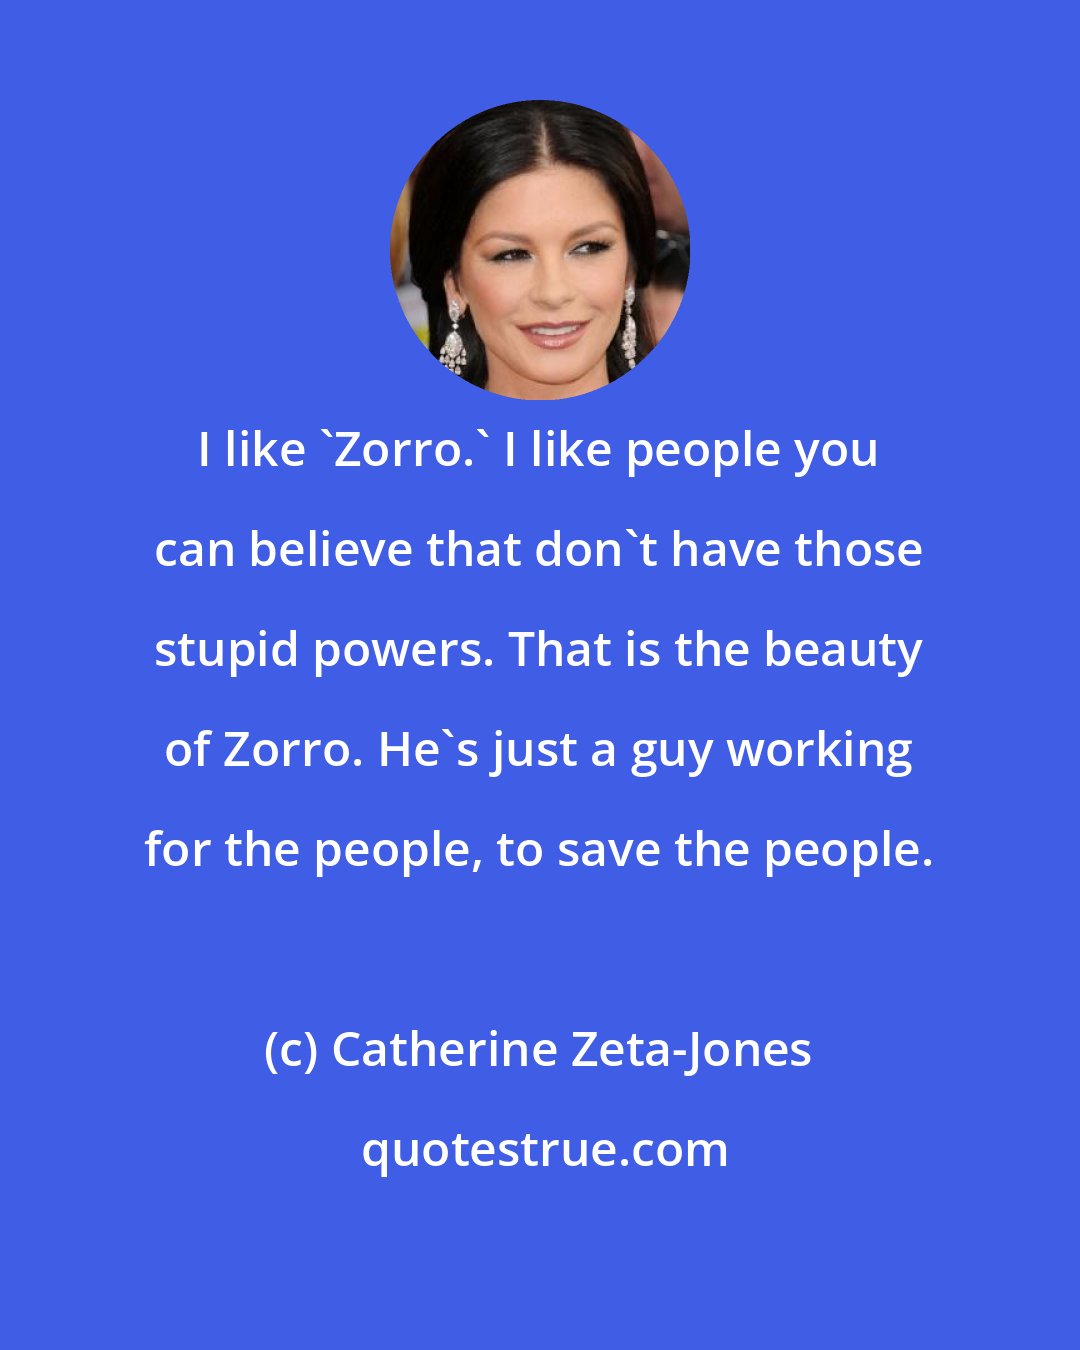 Catherine Zeta-Jones: I like 'Zorro.' I like people you can believe that don't have those stupid powers. That is the beauty of Zorro. He's just a guy working for the people, to save the people.